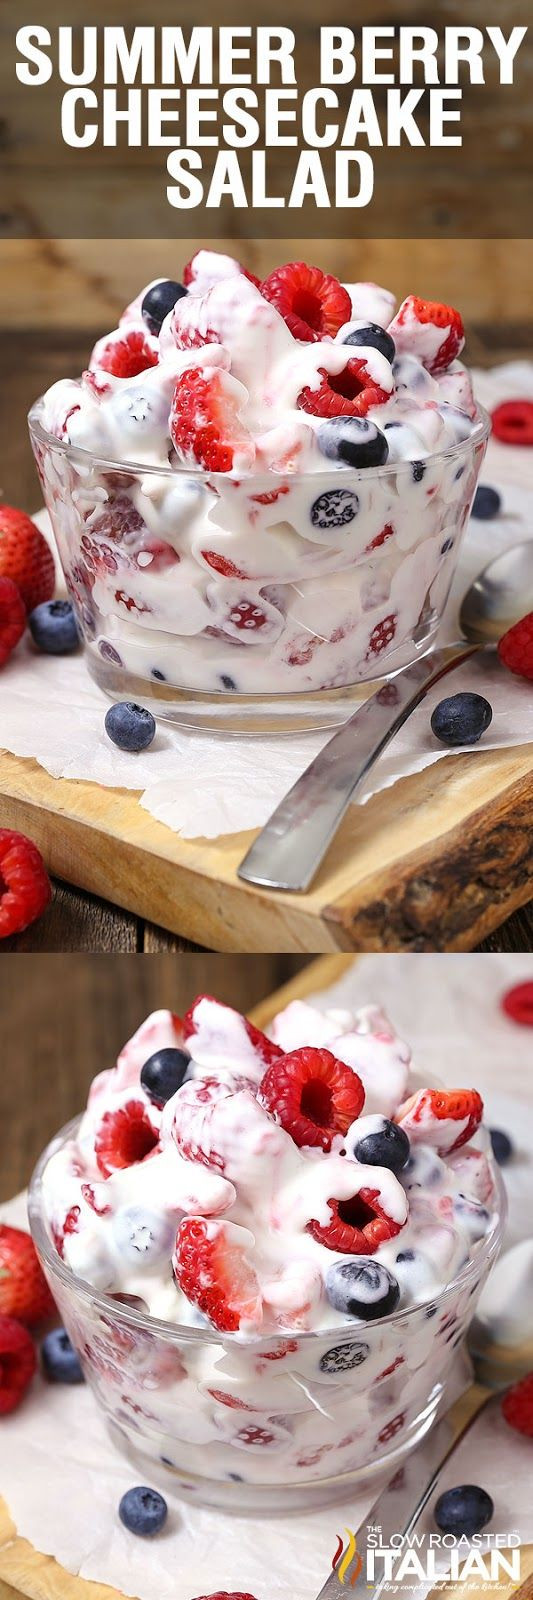 Easy Summer Desserts With Few Ingredients
 Summer Berry Cheesecake Salad With Video